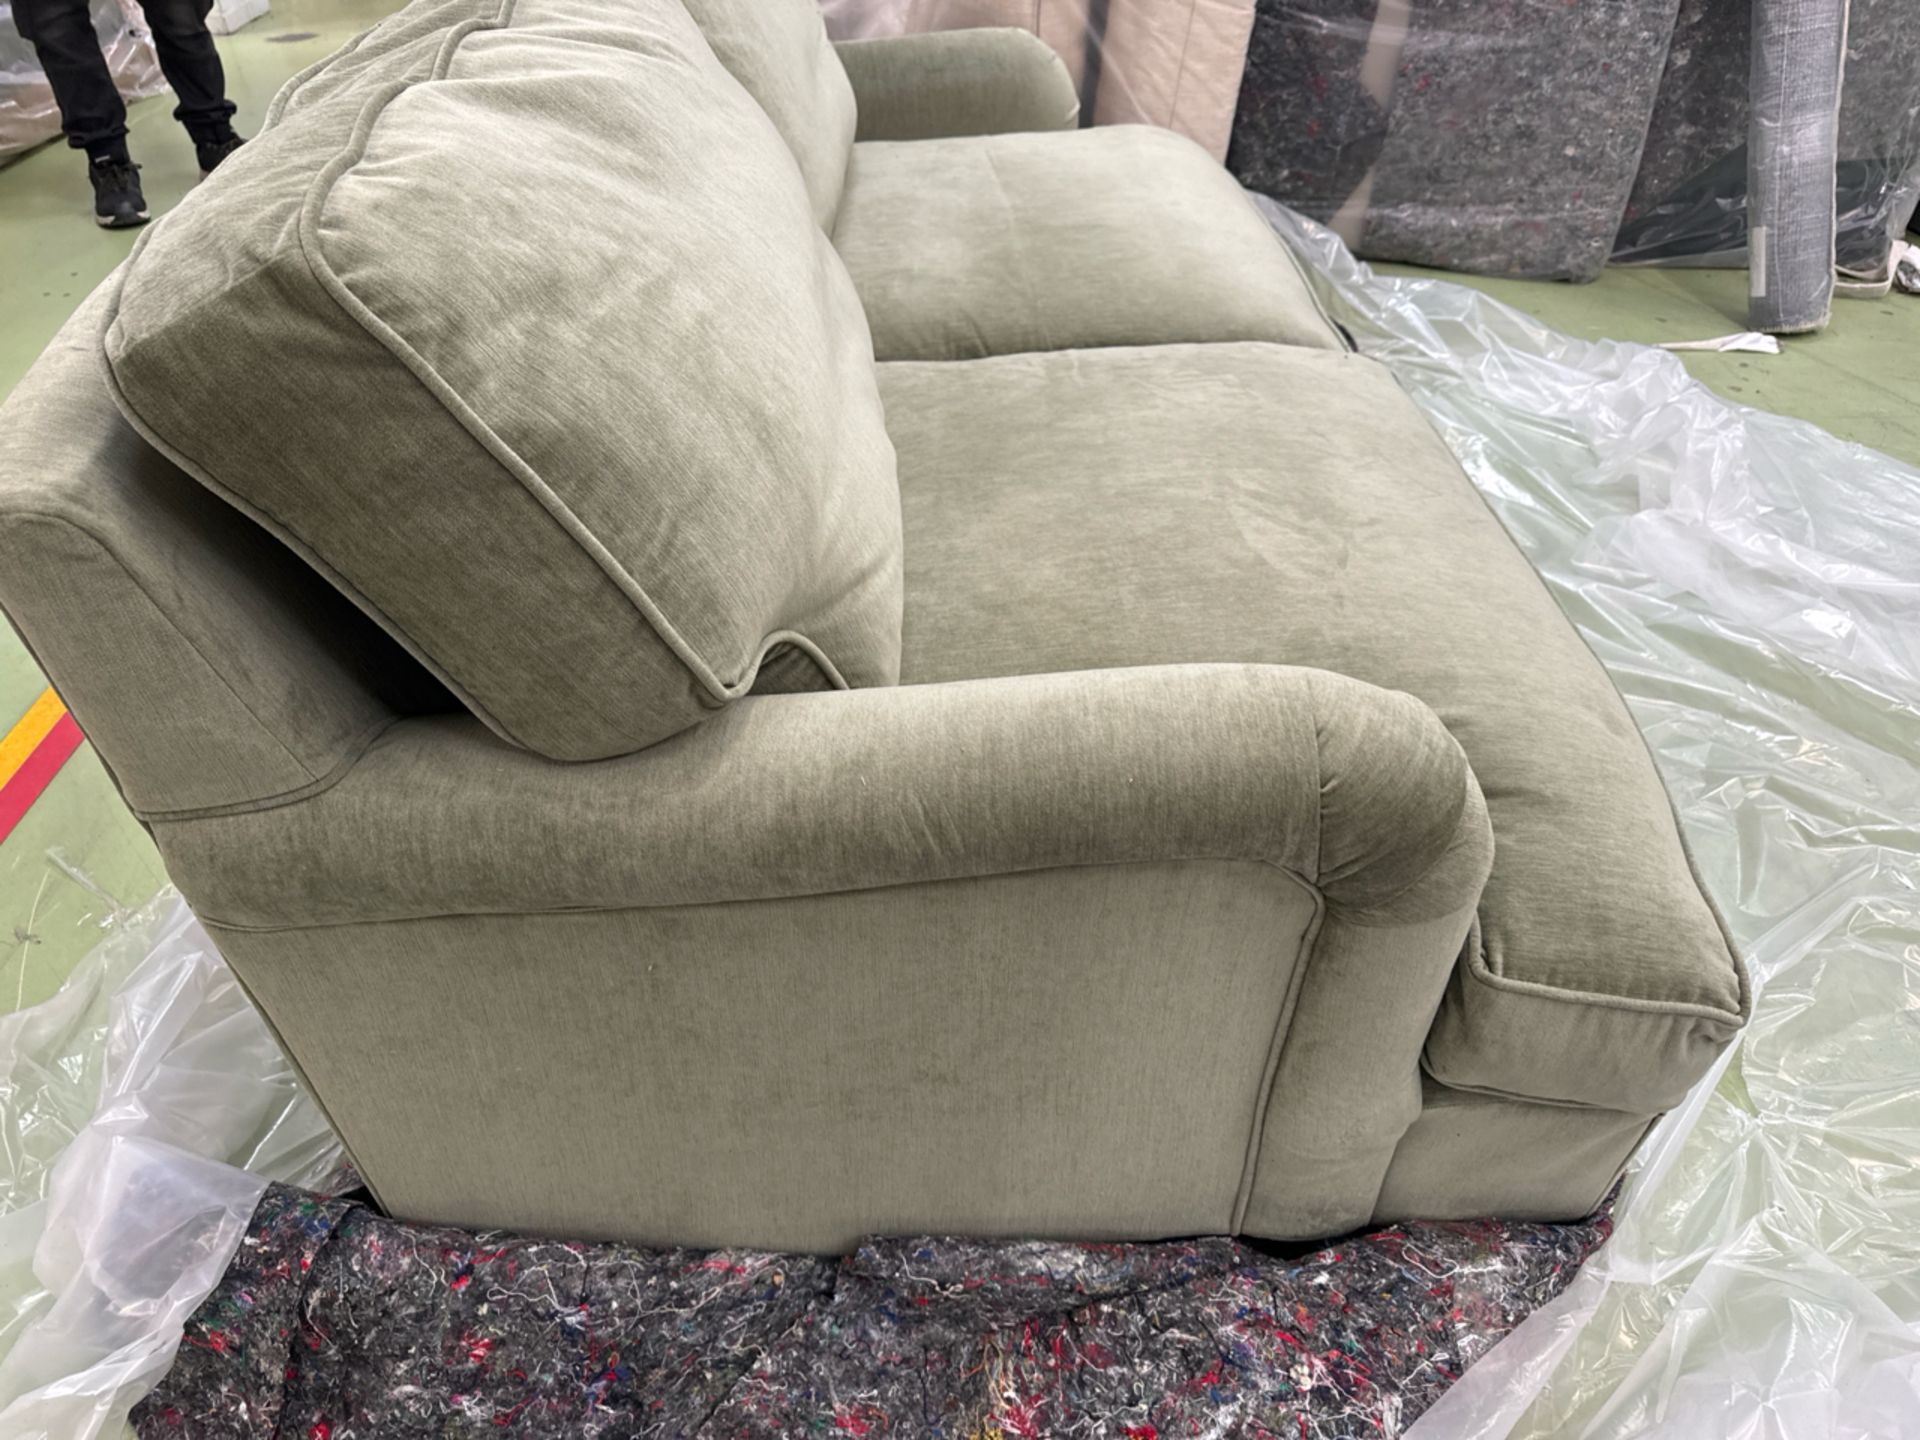 Bluebell 3 Seat Sofa Bed In Urban Nature Brushstroke - Image 5 of 8